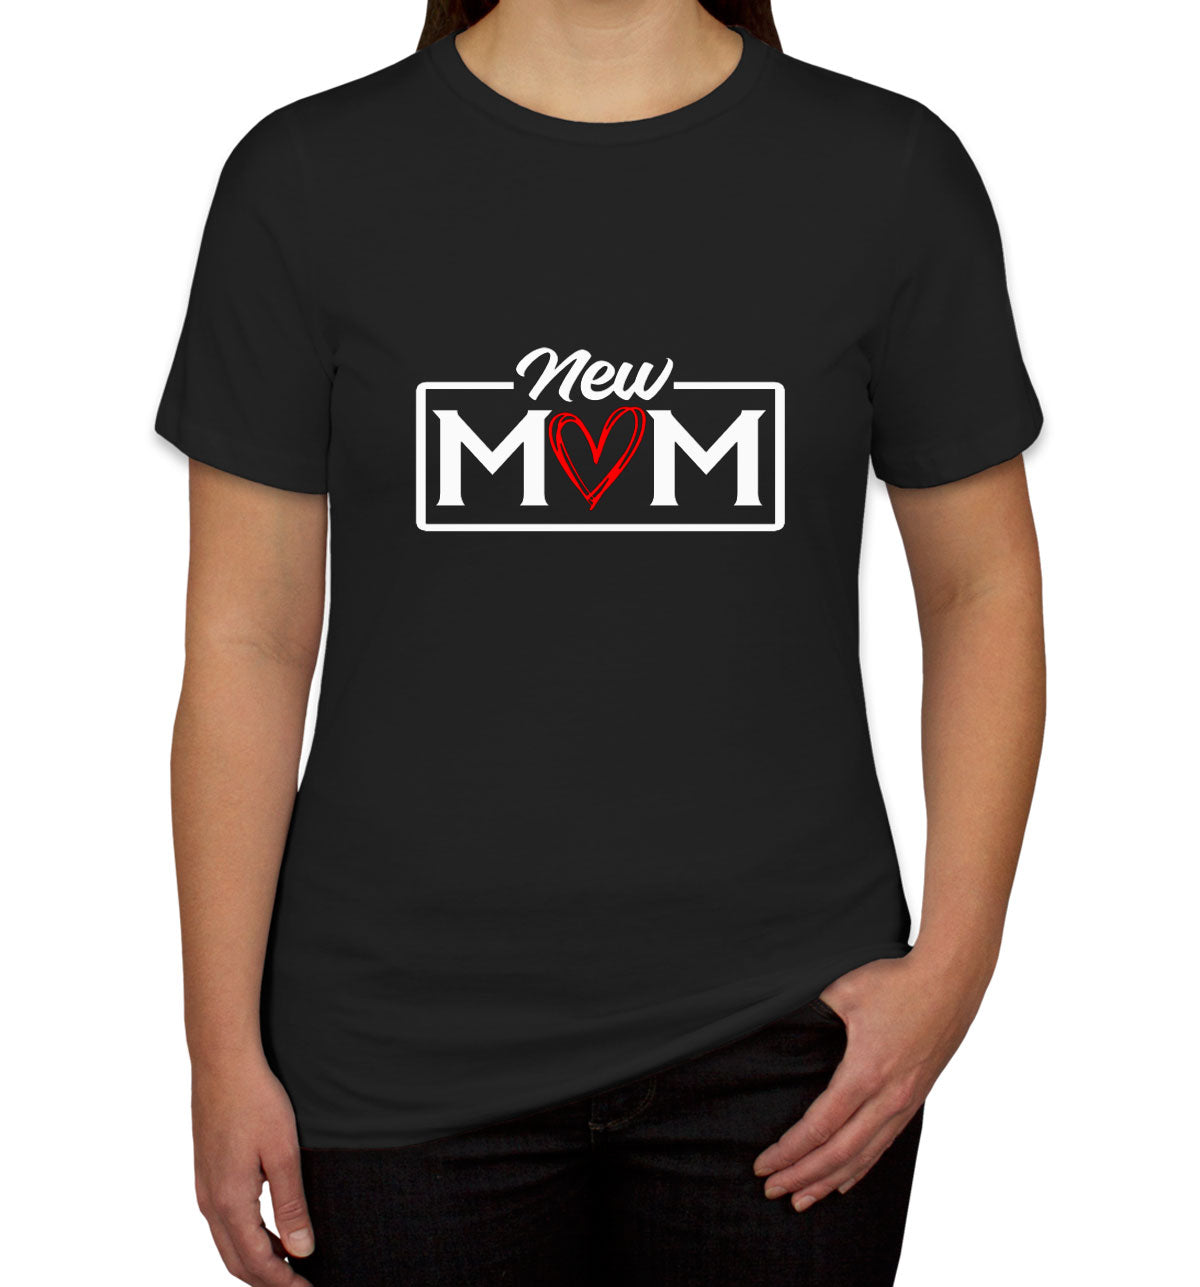 New Mom Mother's Day Women's T-shirt